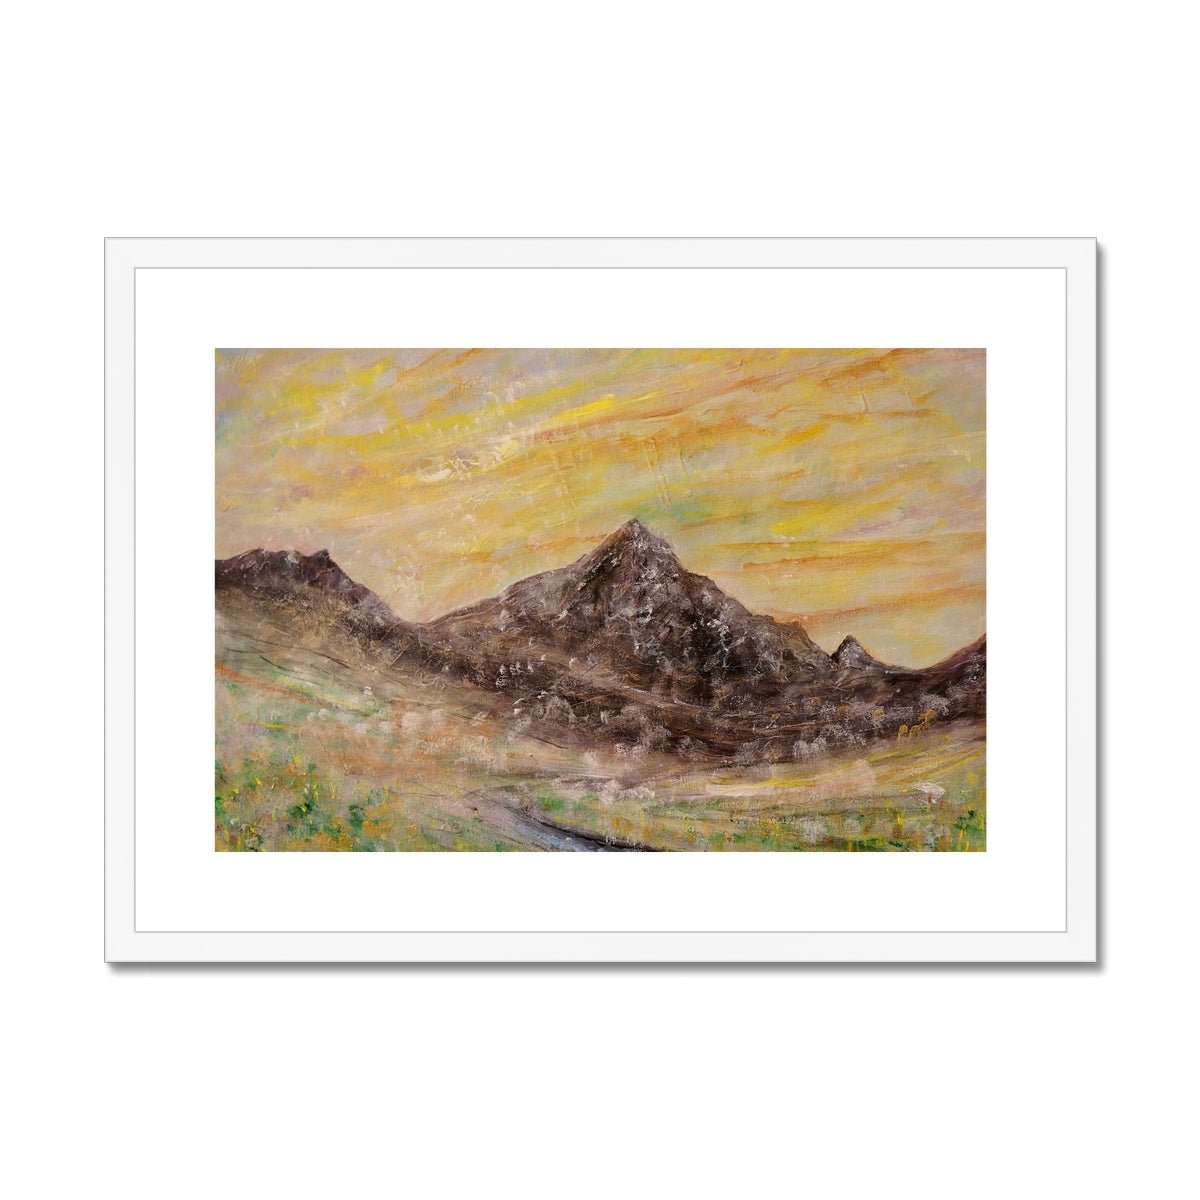 Glen Rosa Mist Painting | Framed & Mounted Prints From Scotland-Framed & Mounted Prints-Arran Art Gallery-A2 Landscape-White Frame-Paintings, Prints, Homeware, Art Gifts From Scotland By Scottish Artist Kevin Hunter